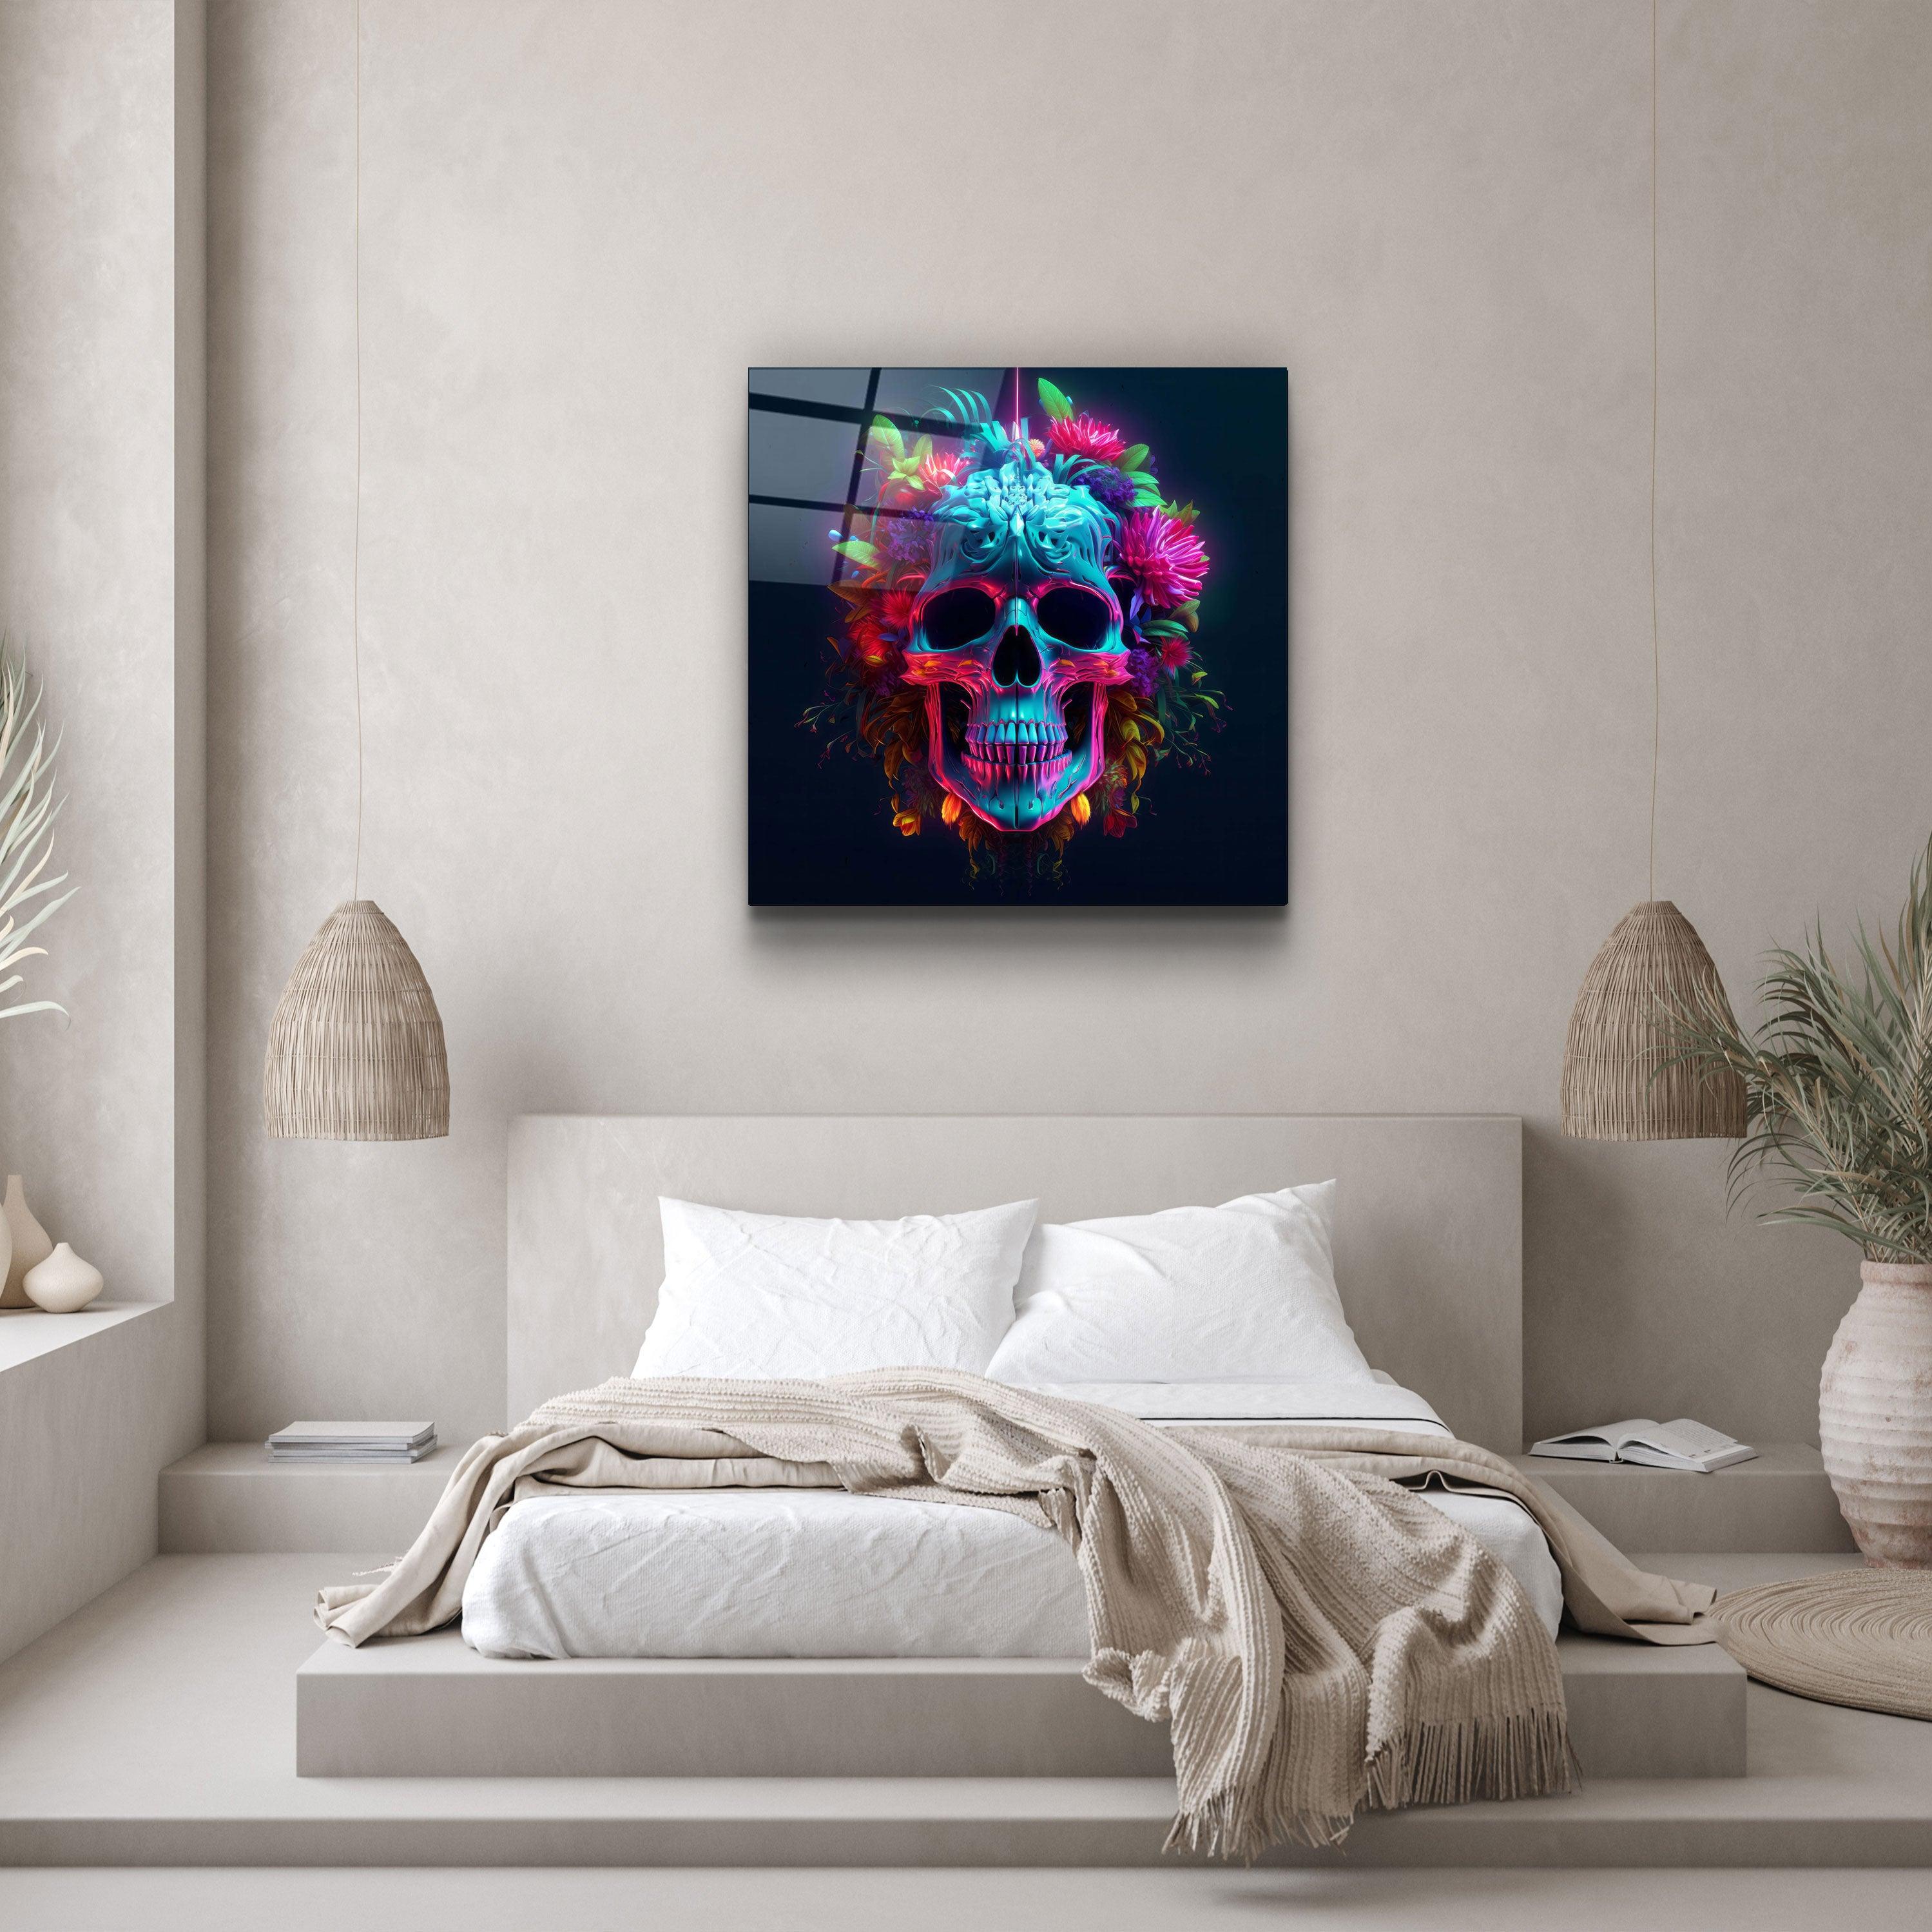 ."Skull". Designers Collection Glass Wall Art